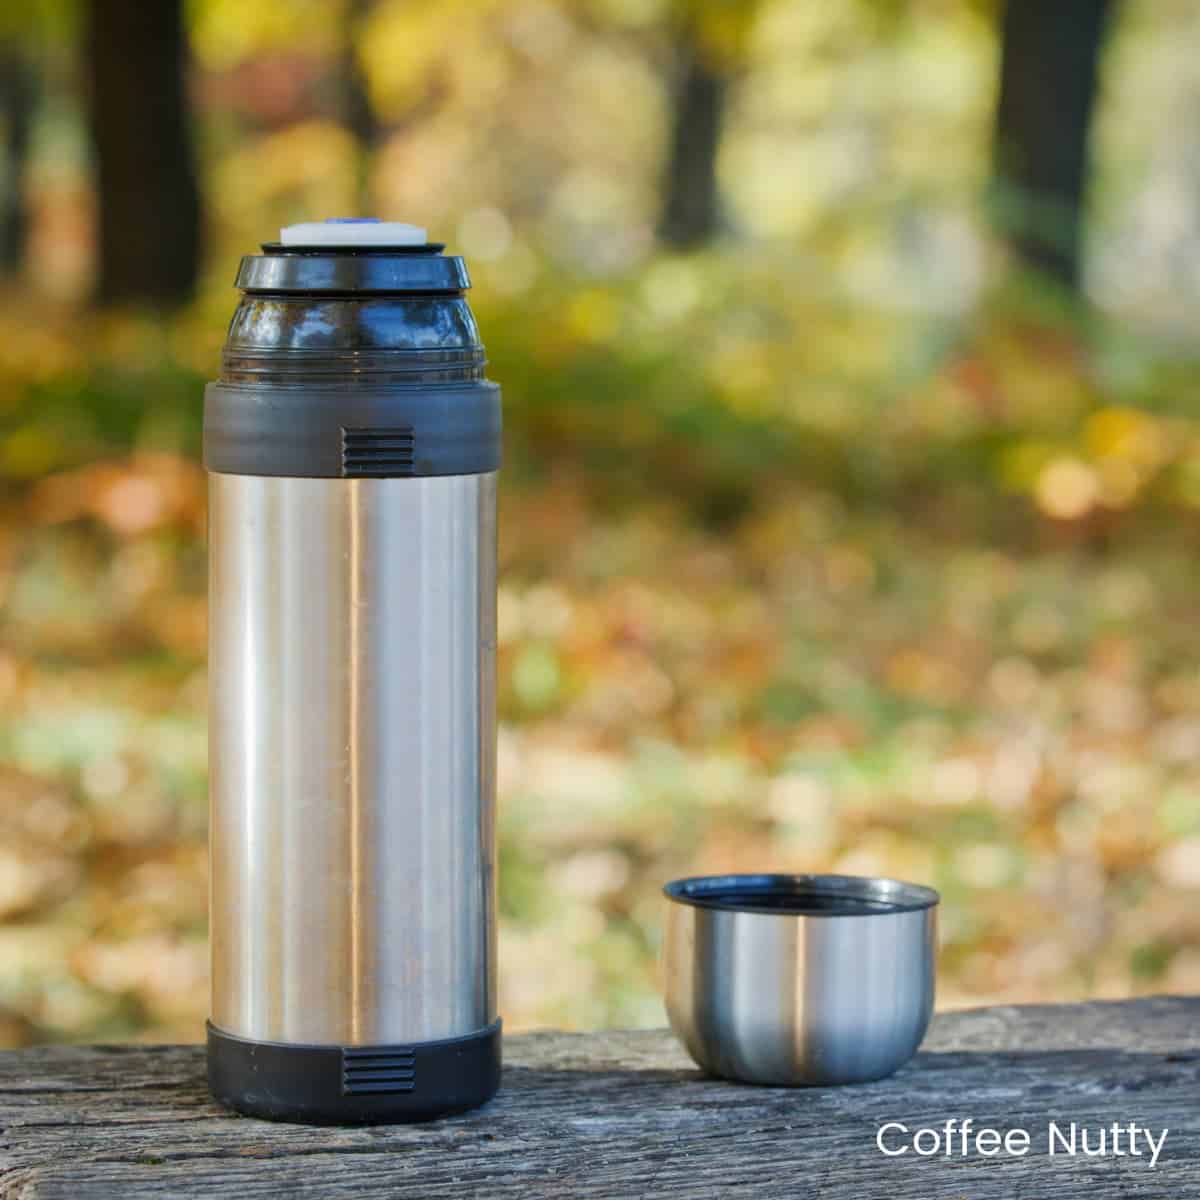 Coffee thermos and lid with blurred background of autumn leaves.